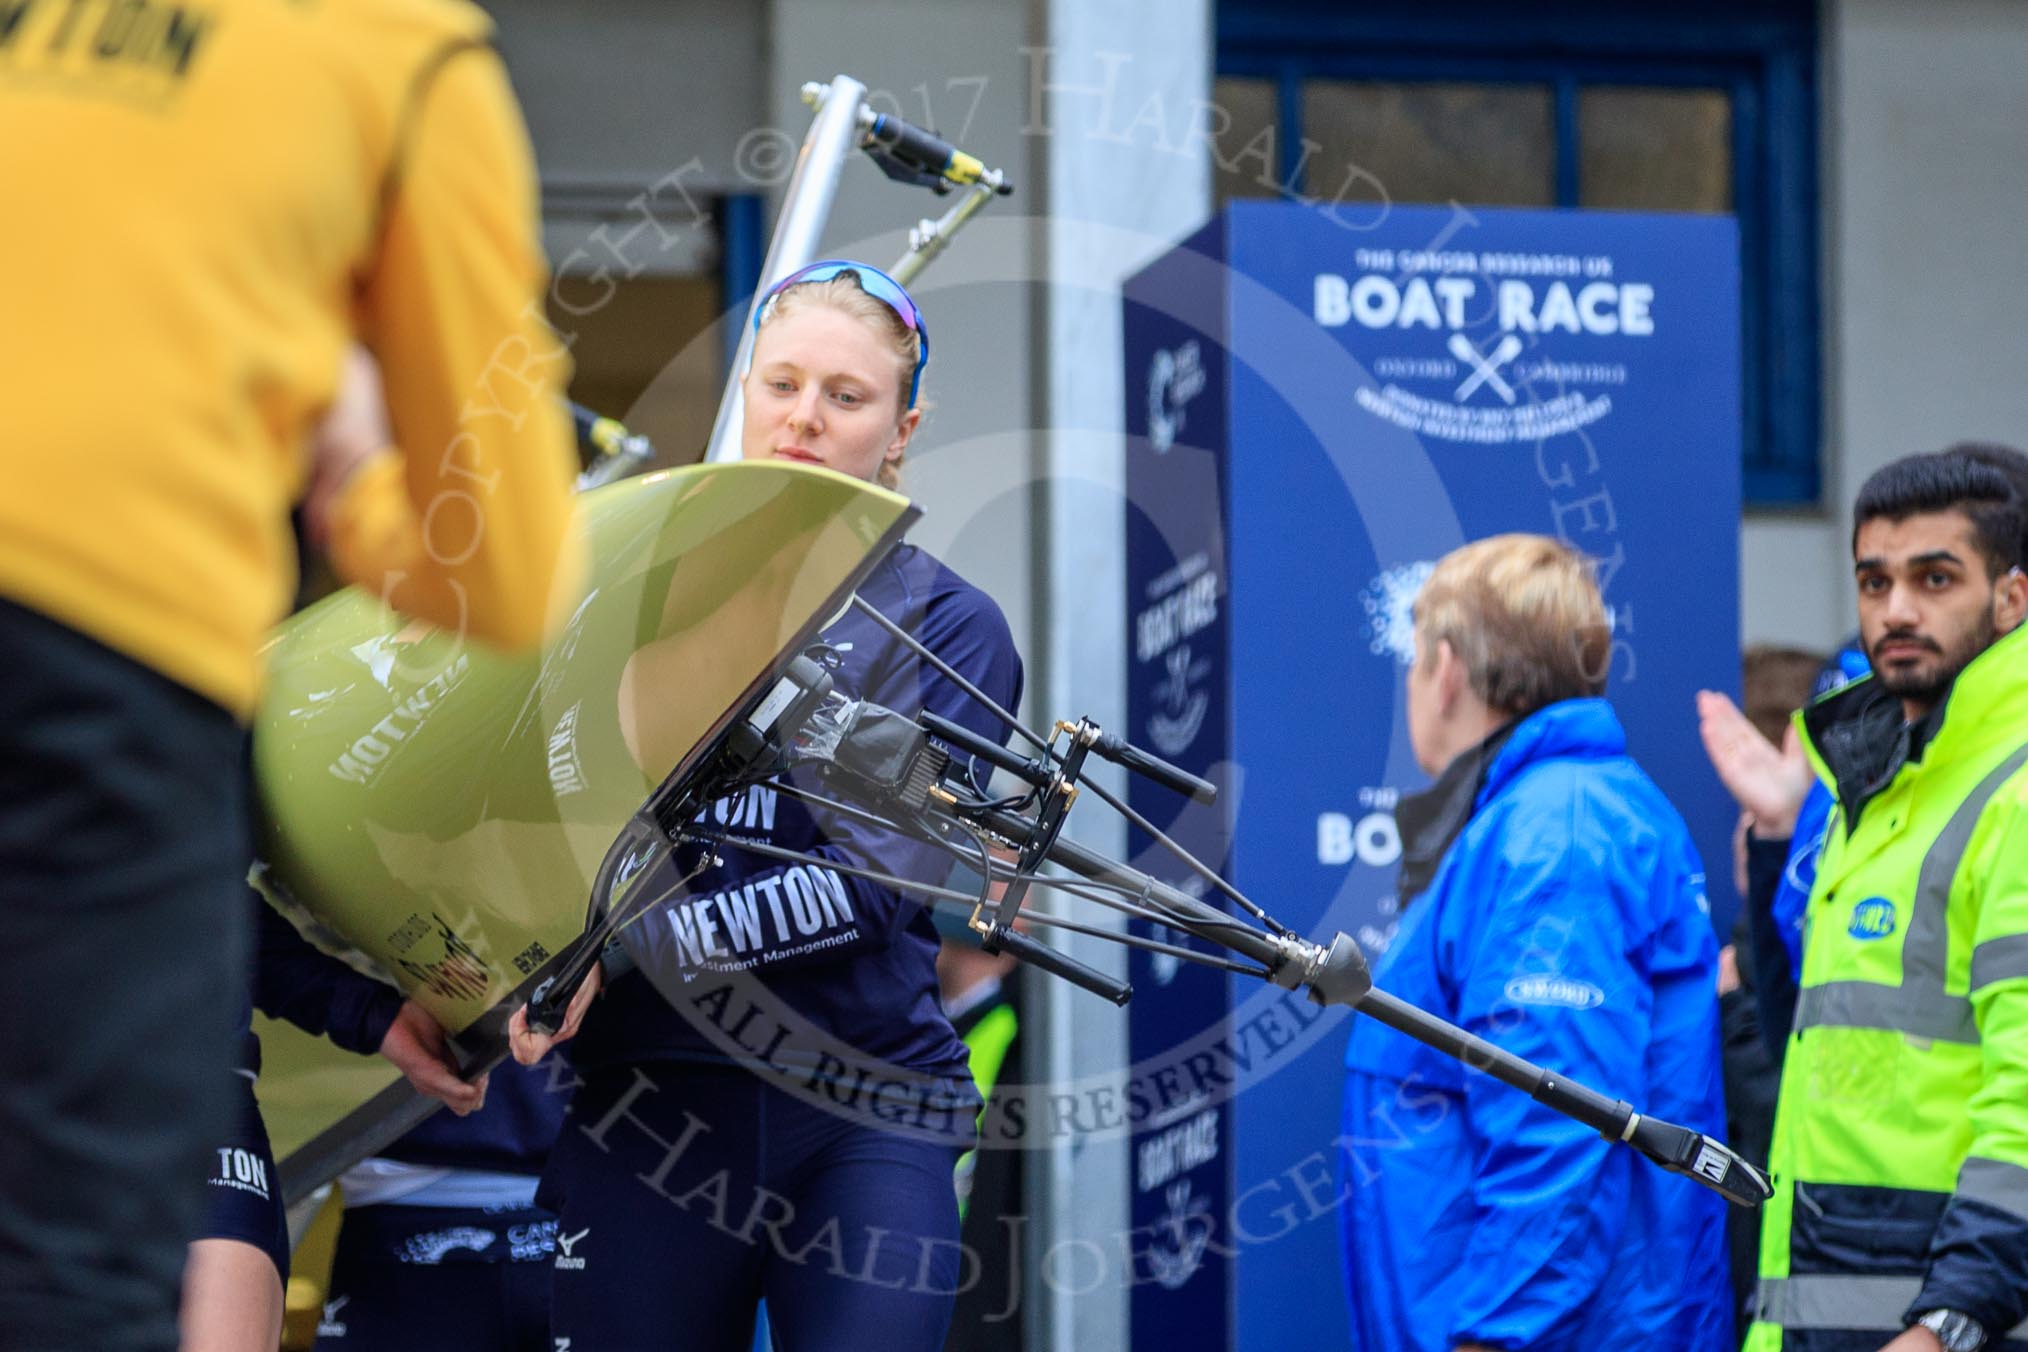 The Cancer Research UK Women's Boat Race 2018: THe Oxford boat, with the BBC camera assembly mounted on the rear, is carried out of the boathouse, In front stroke Beth Bridgman.
River Thames between Putney Bridge and Mortlake,
London SW15,

United Kingdom,
on 24 March 2018 at 15:42, image #88